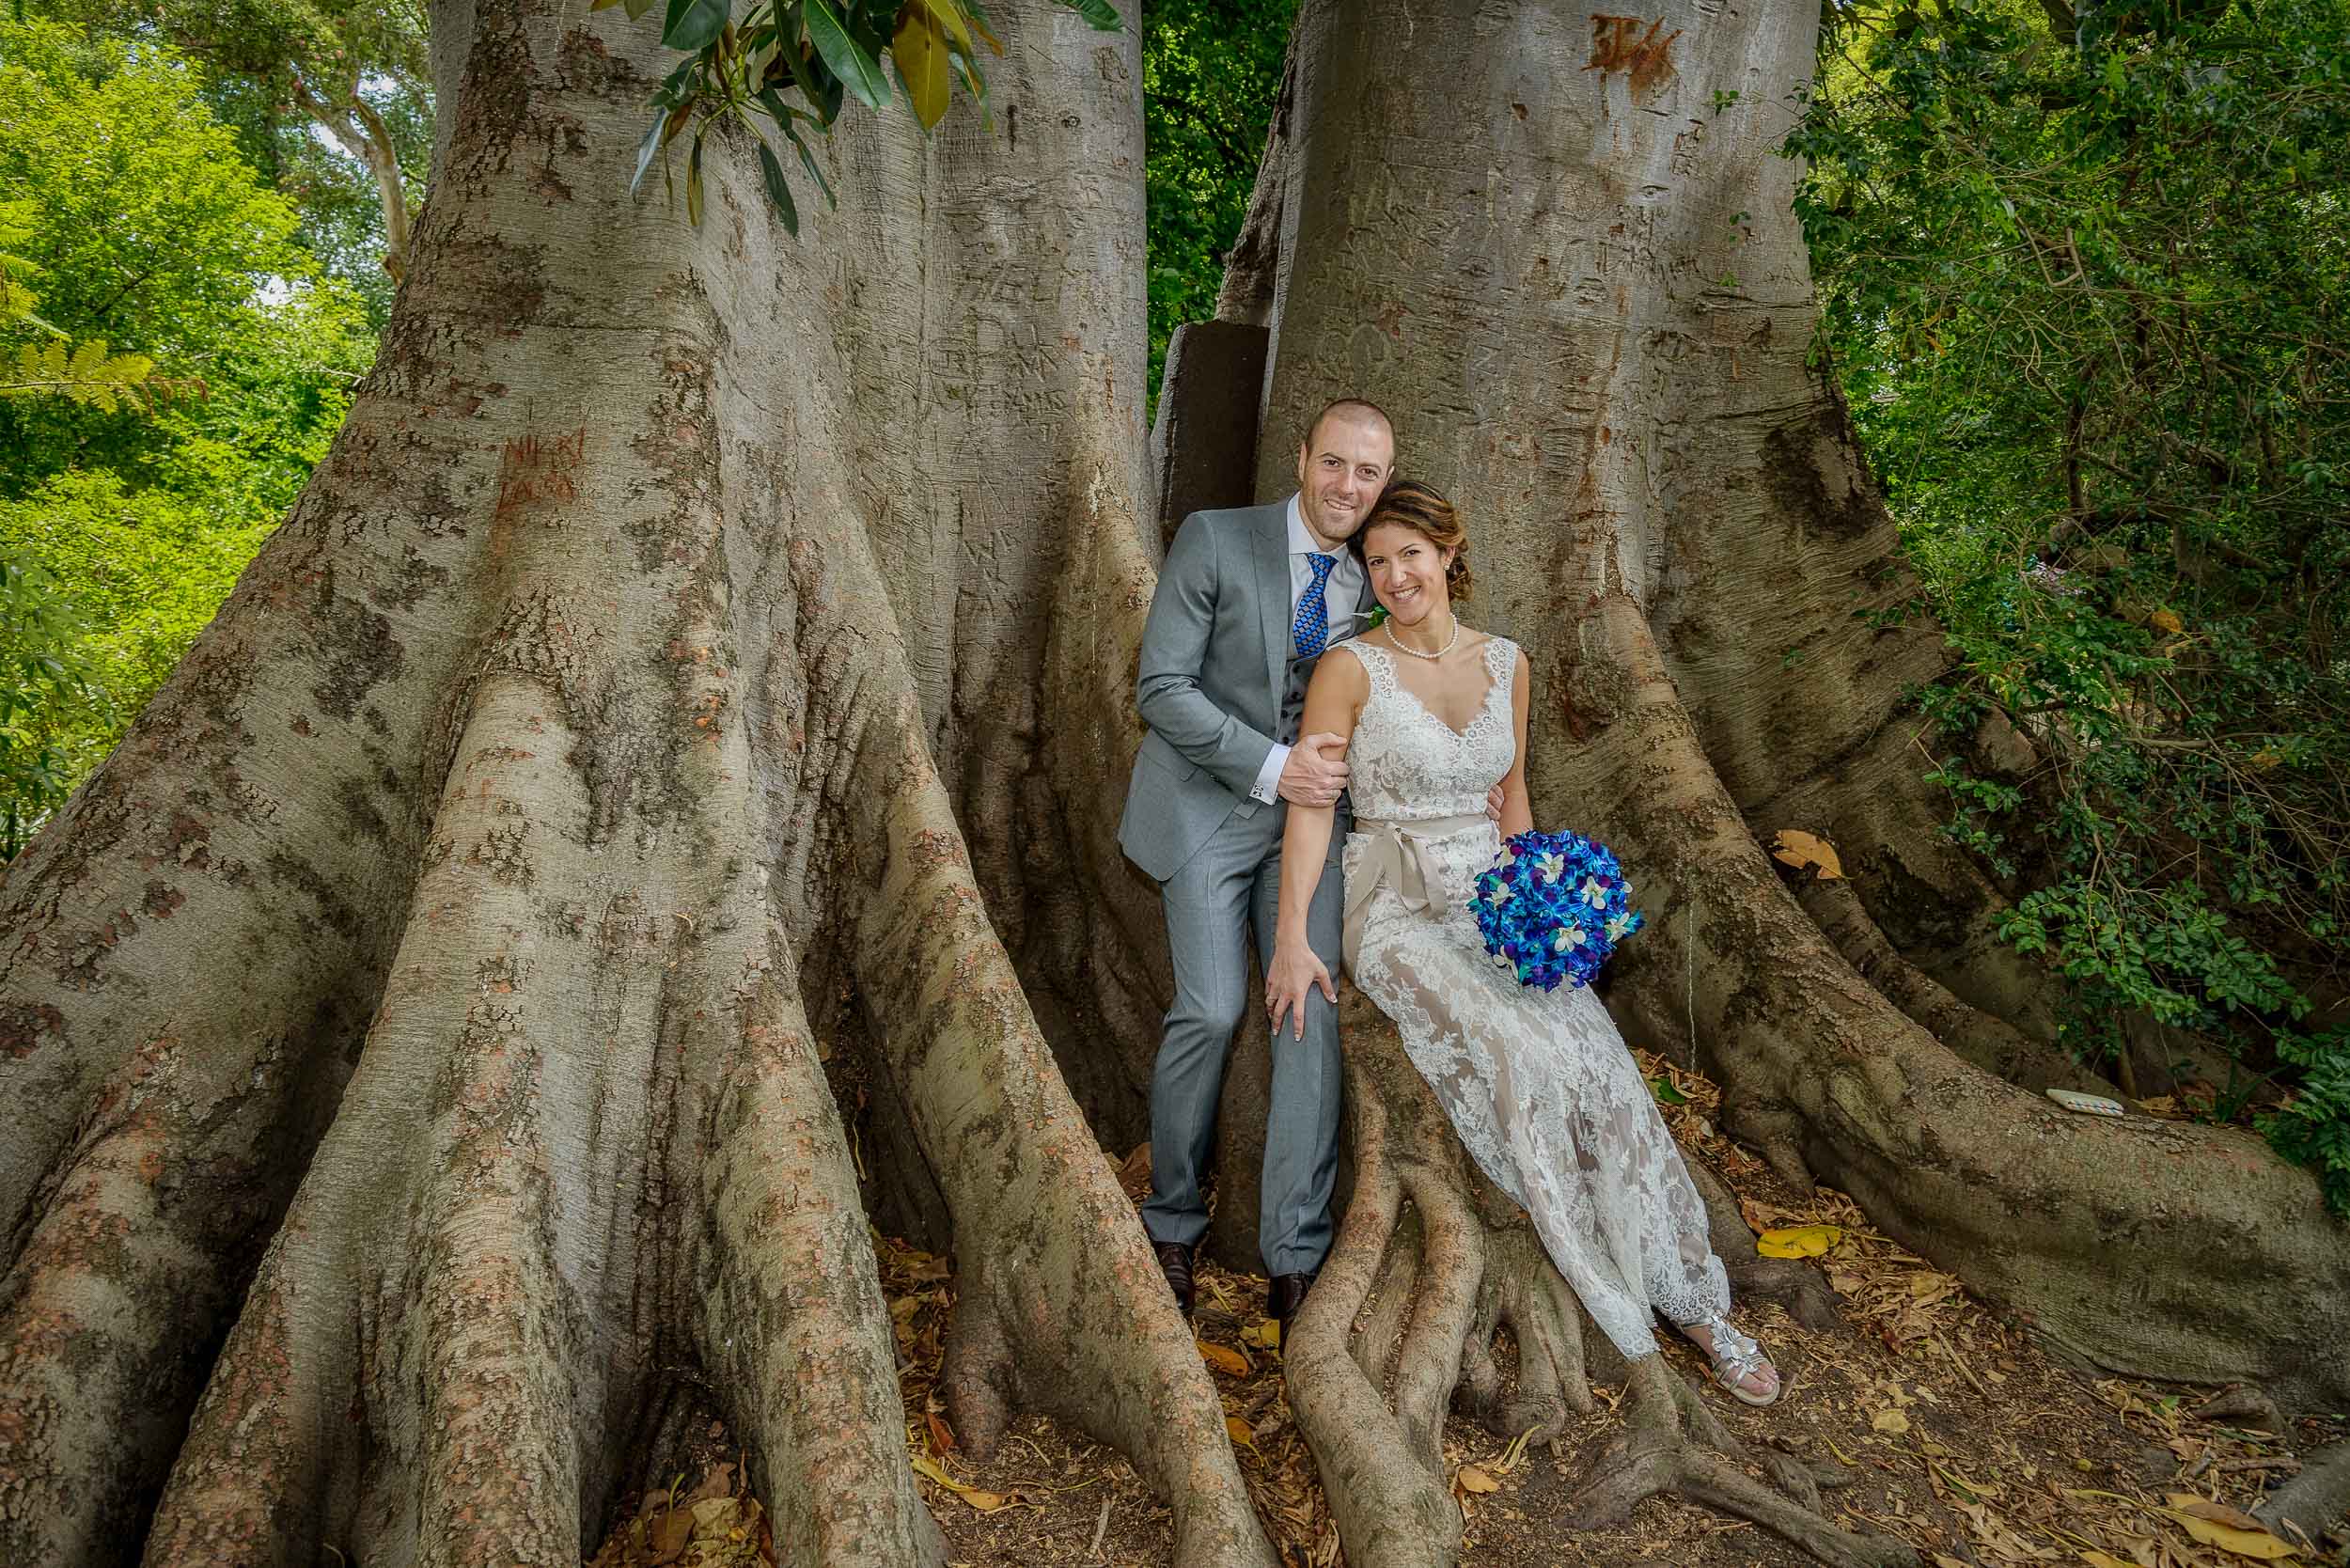 Bride and groom relaxing by a huge tree trunk, Melbourne Botanical Gardens.